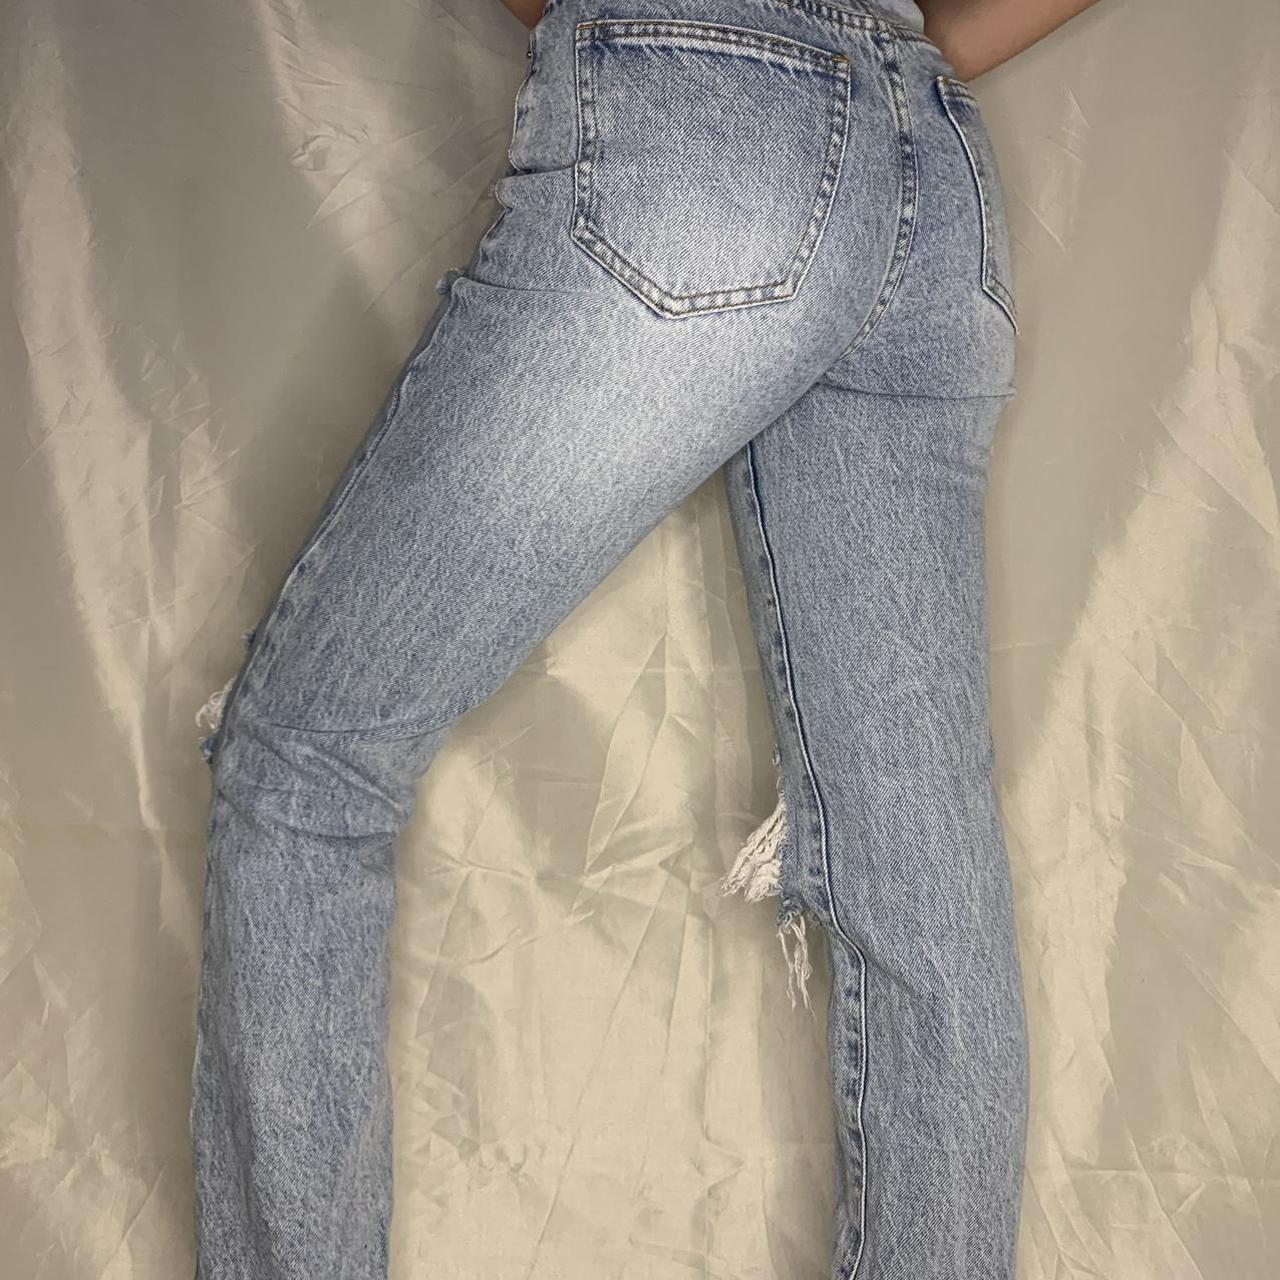 PacSun Eco Light Blue Distressed Mom Jeans - Women's 23